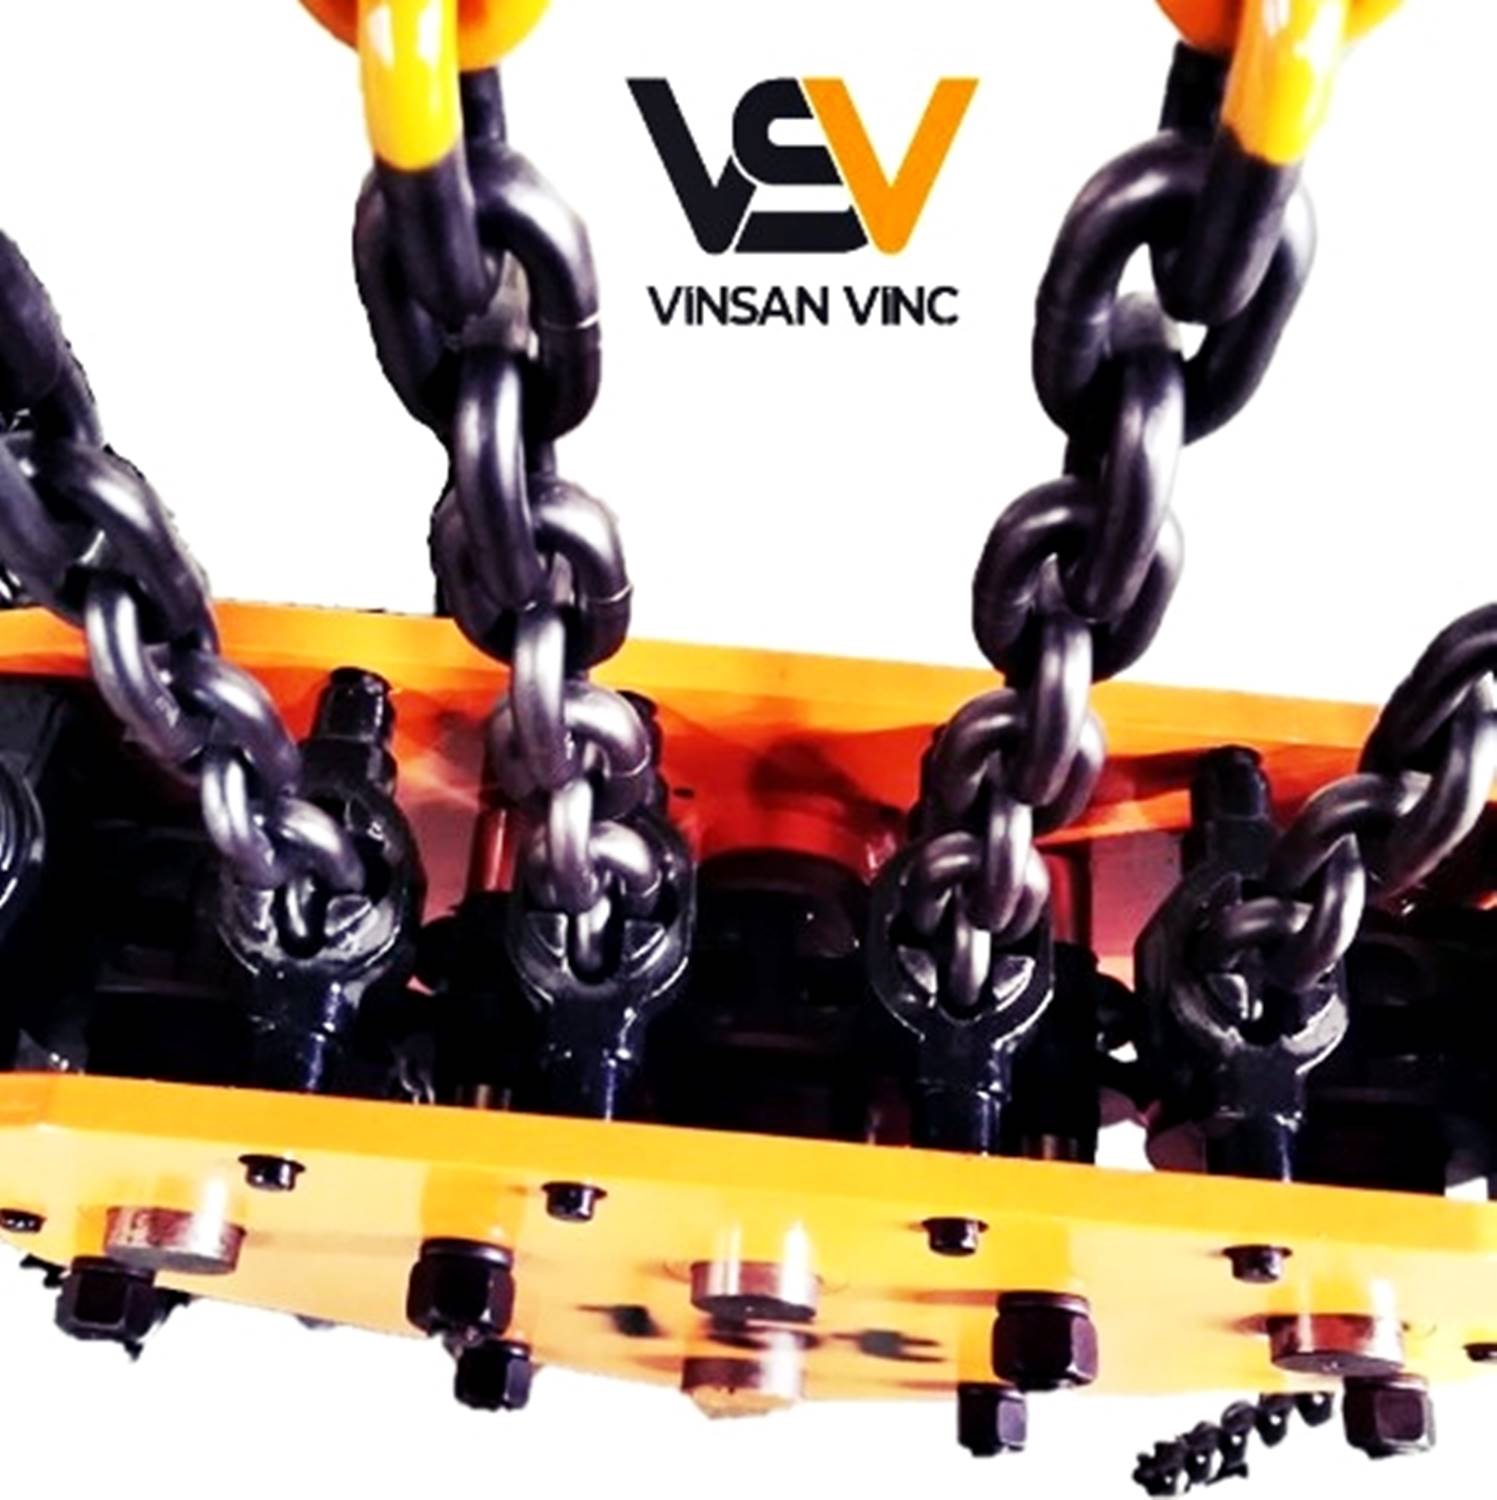 Fixed Suspension 2 Movable Electric Chain Hoist